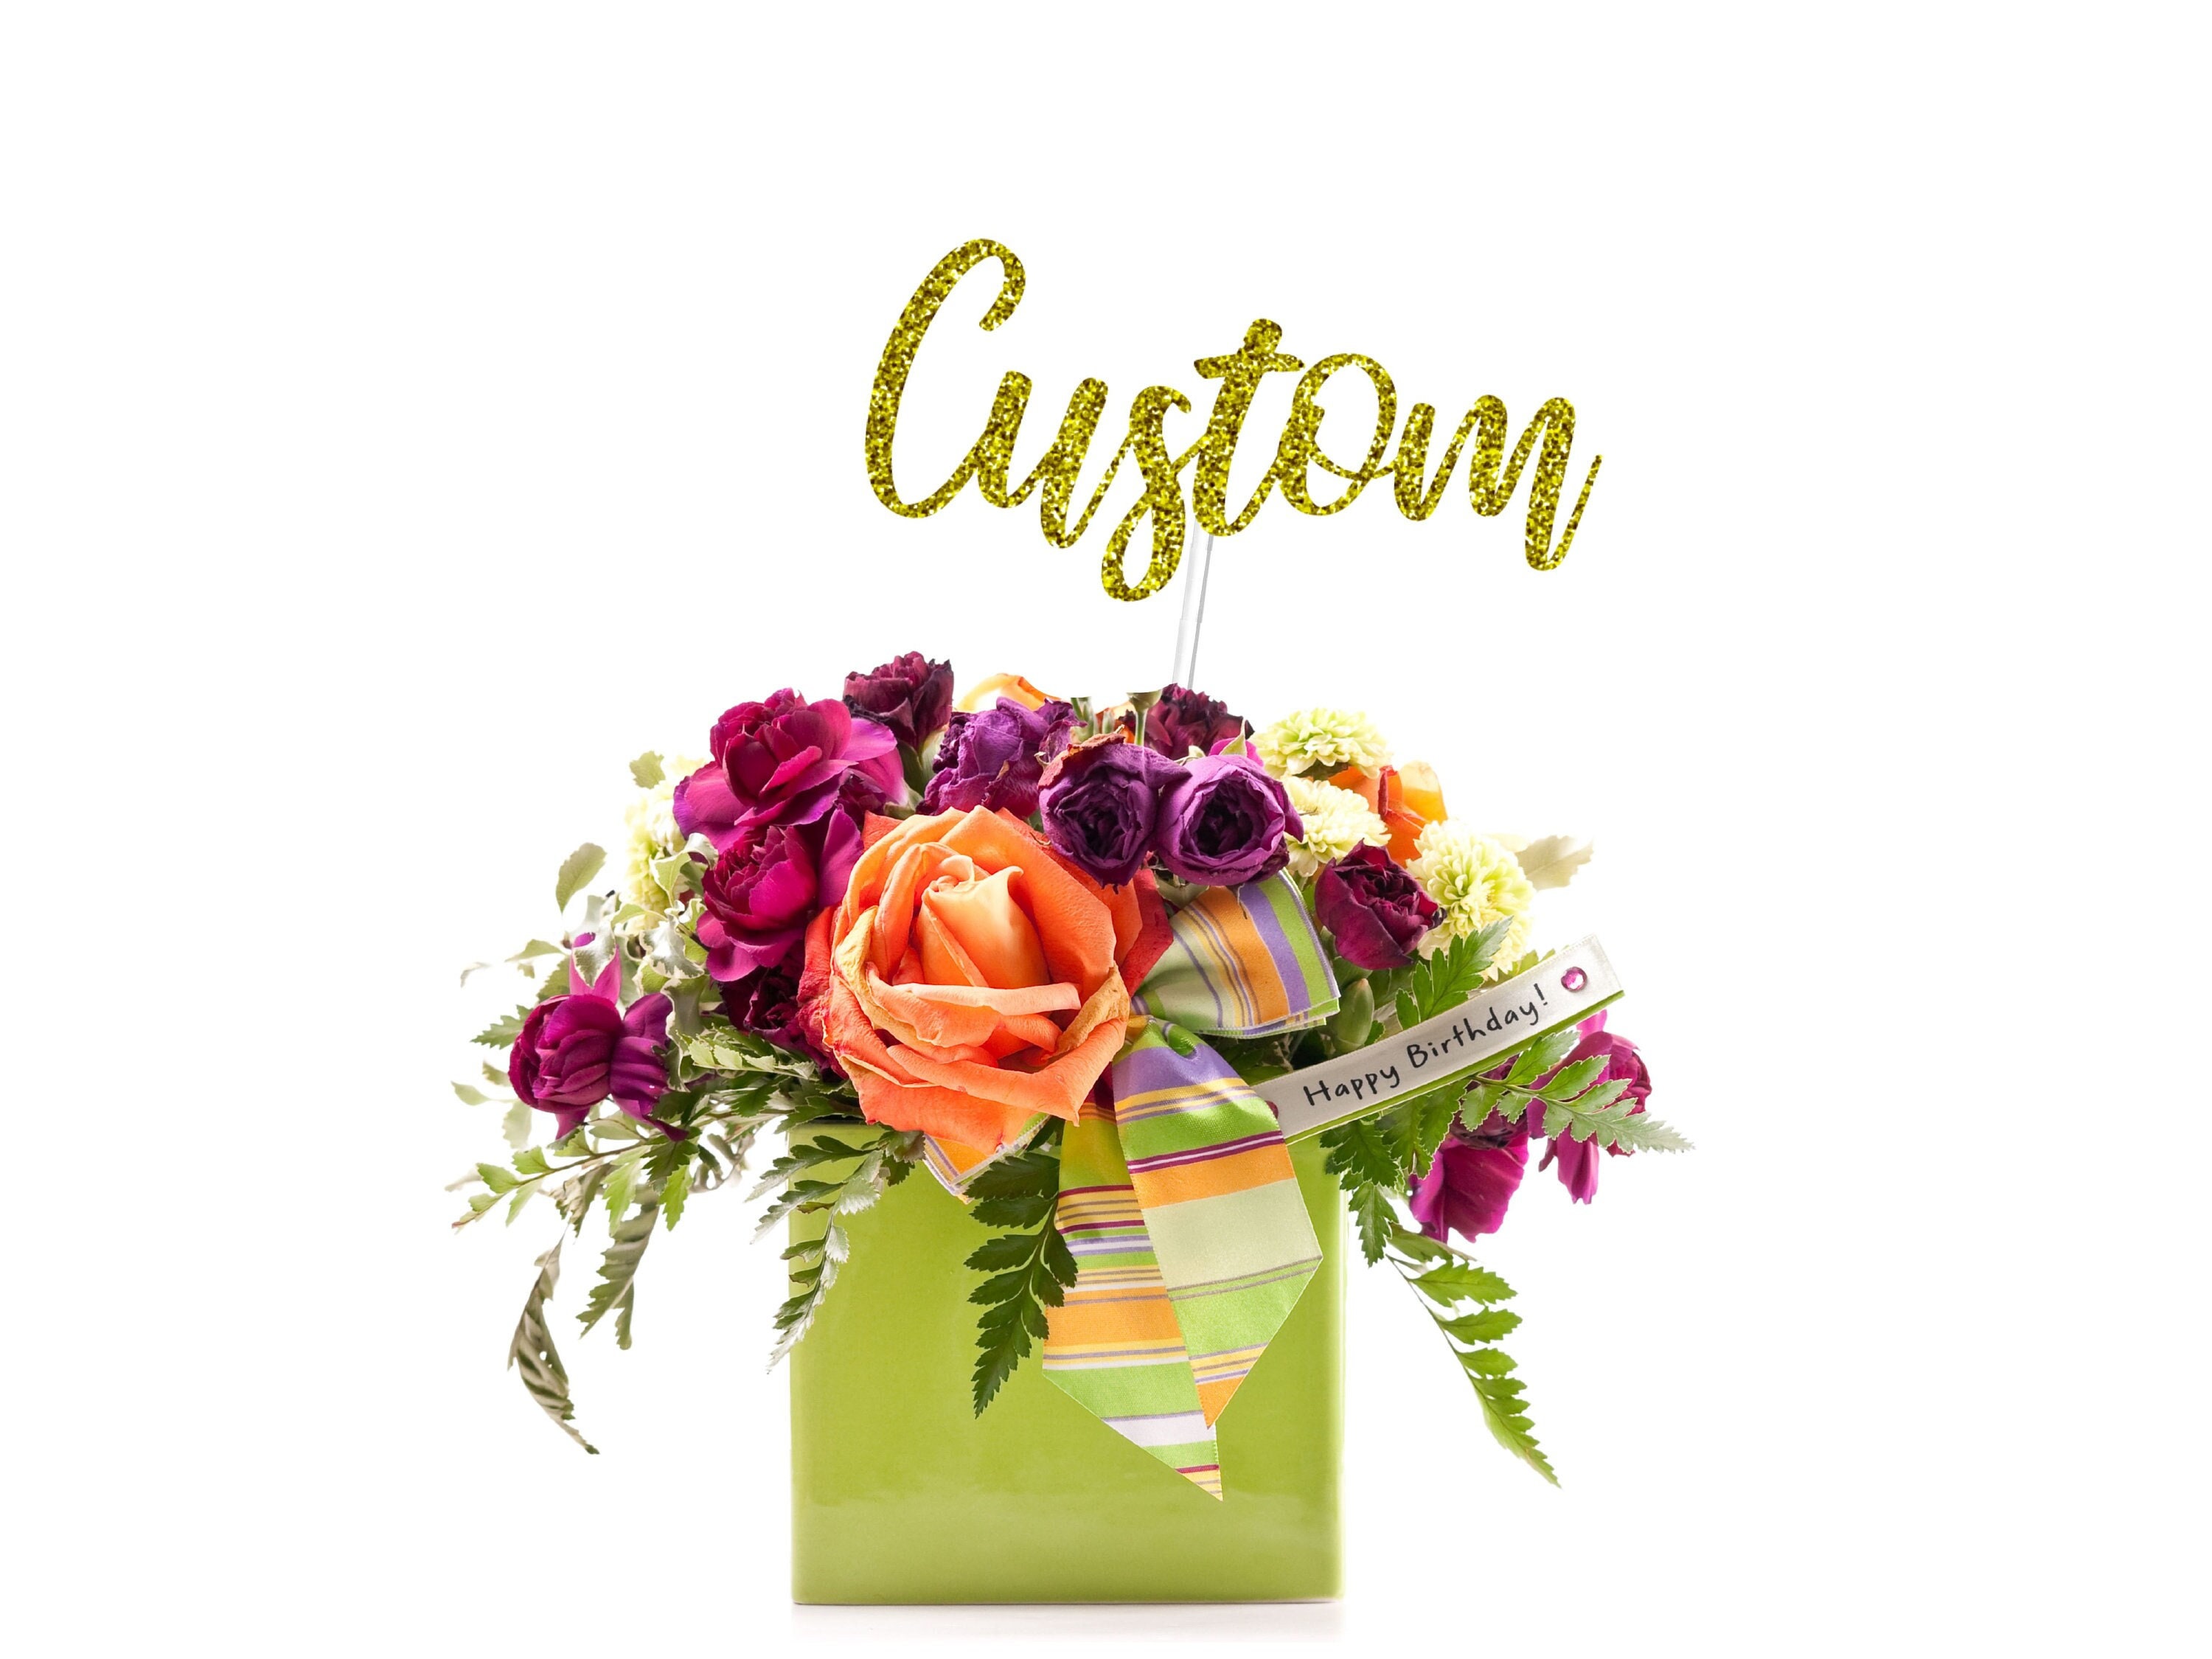 Personalized Mother’s Day Floral Bouquet Sticks